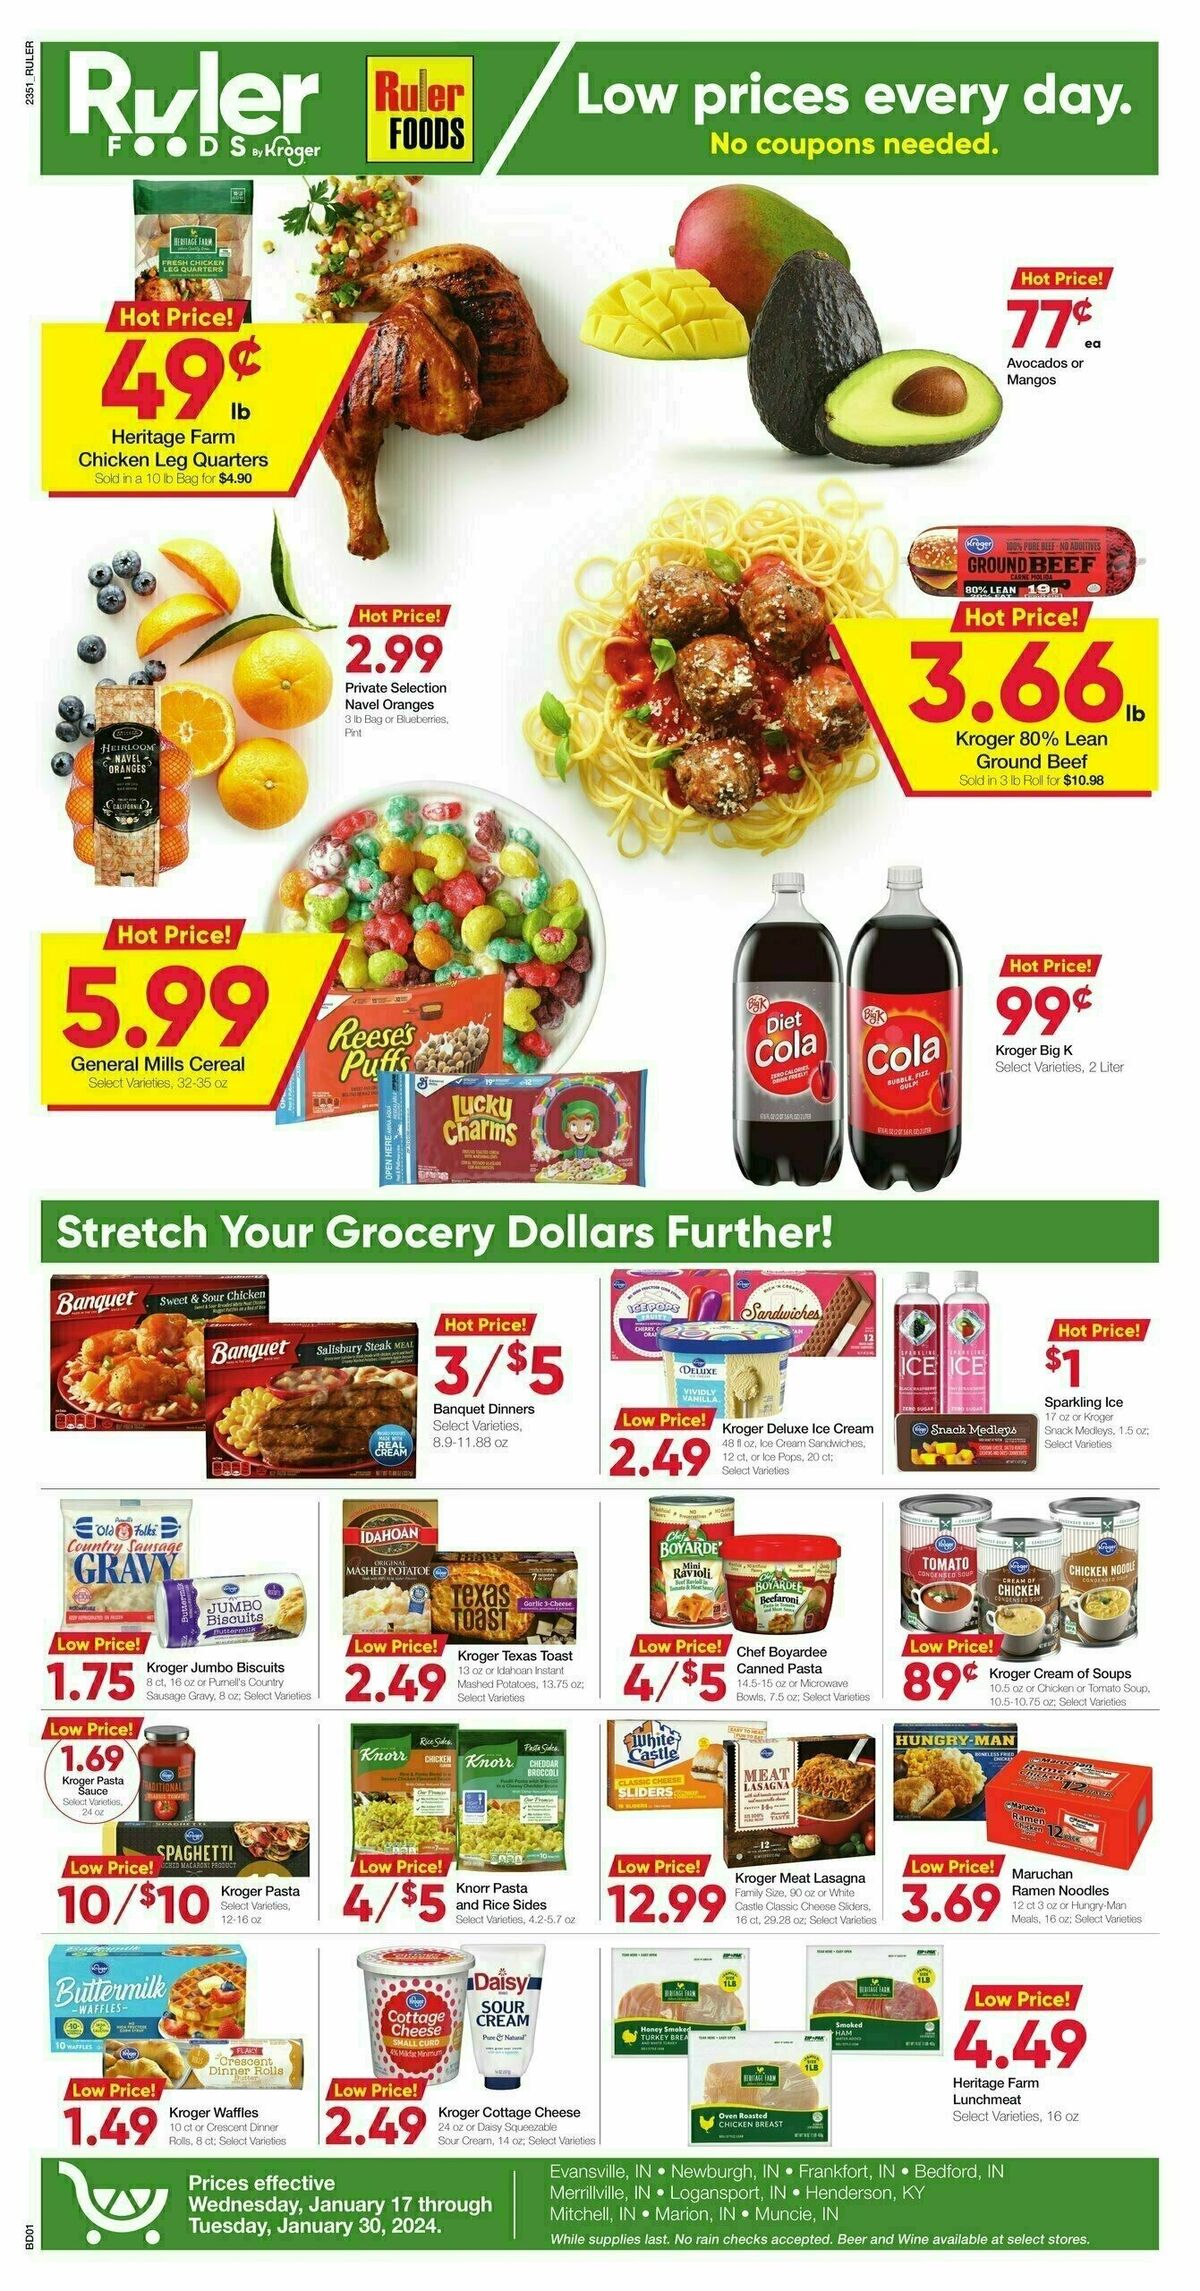 Ruler Foods Weekly Ad from January 17